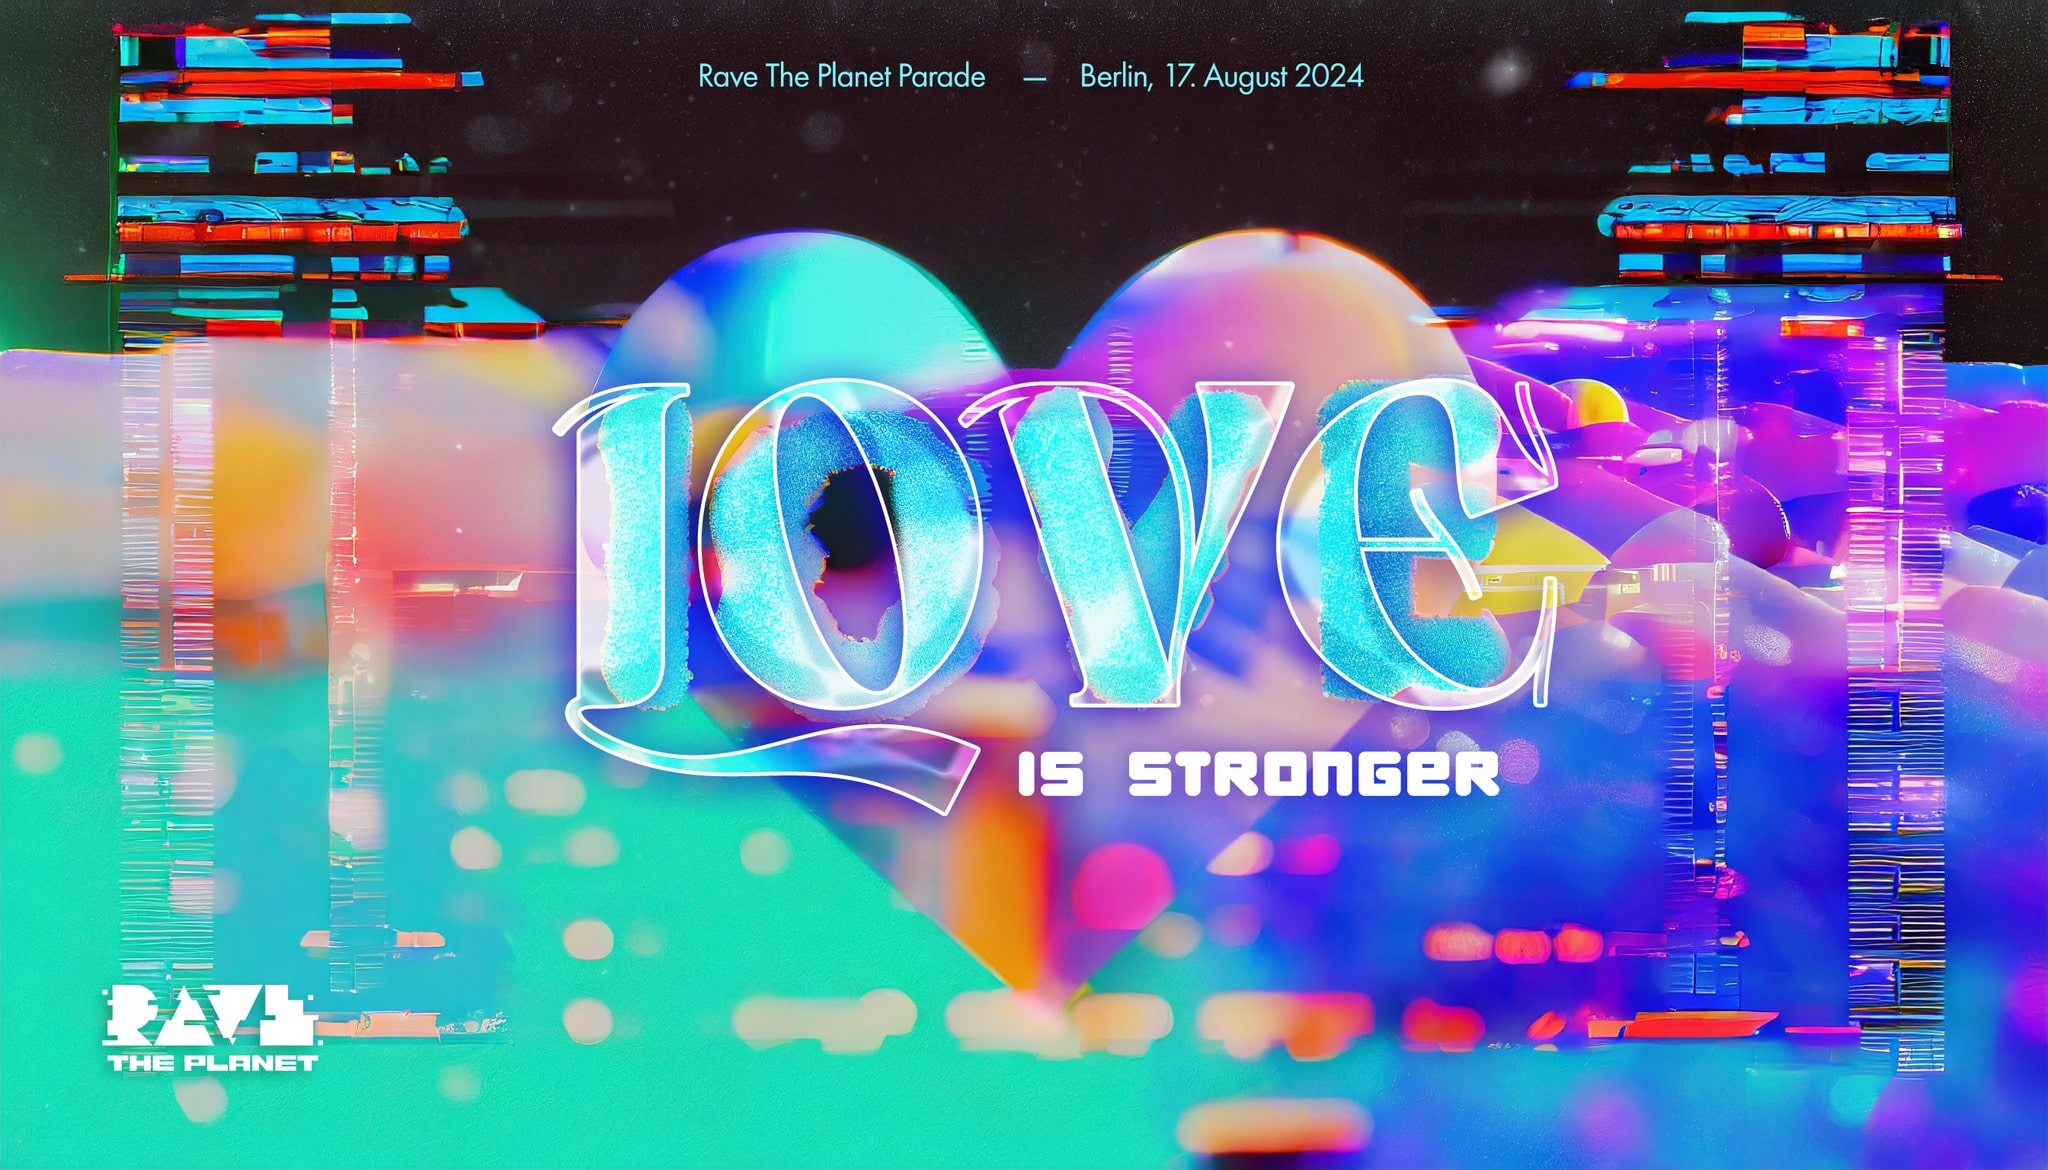 Rave The Planet Parade 2024 – LOVE IS STRONGER